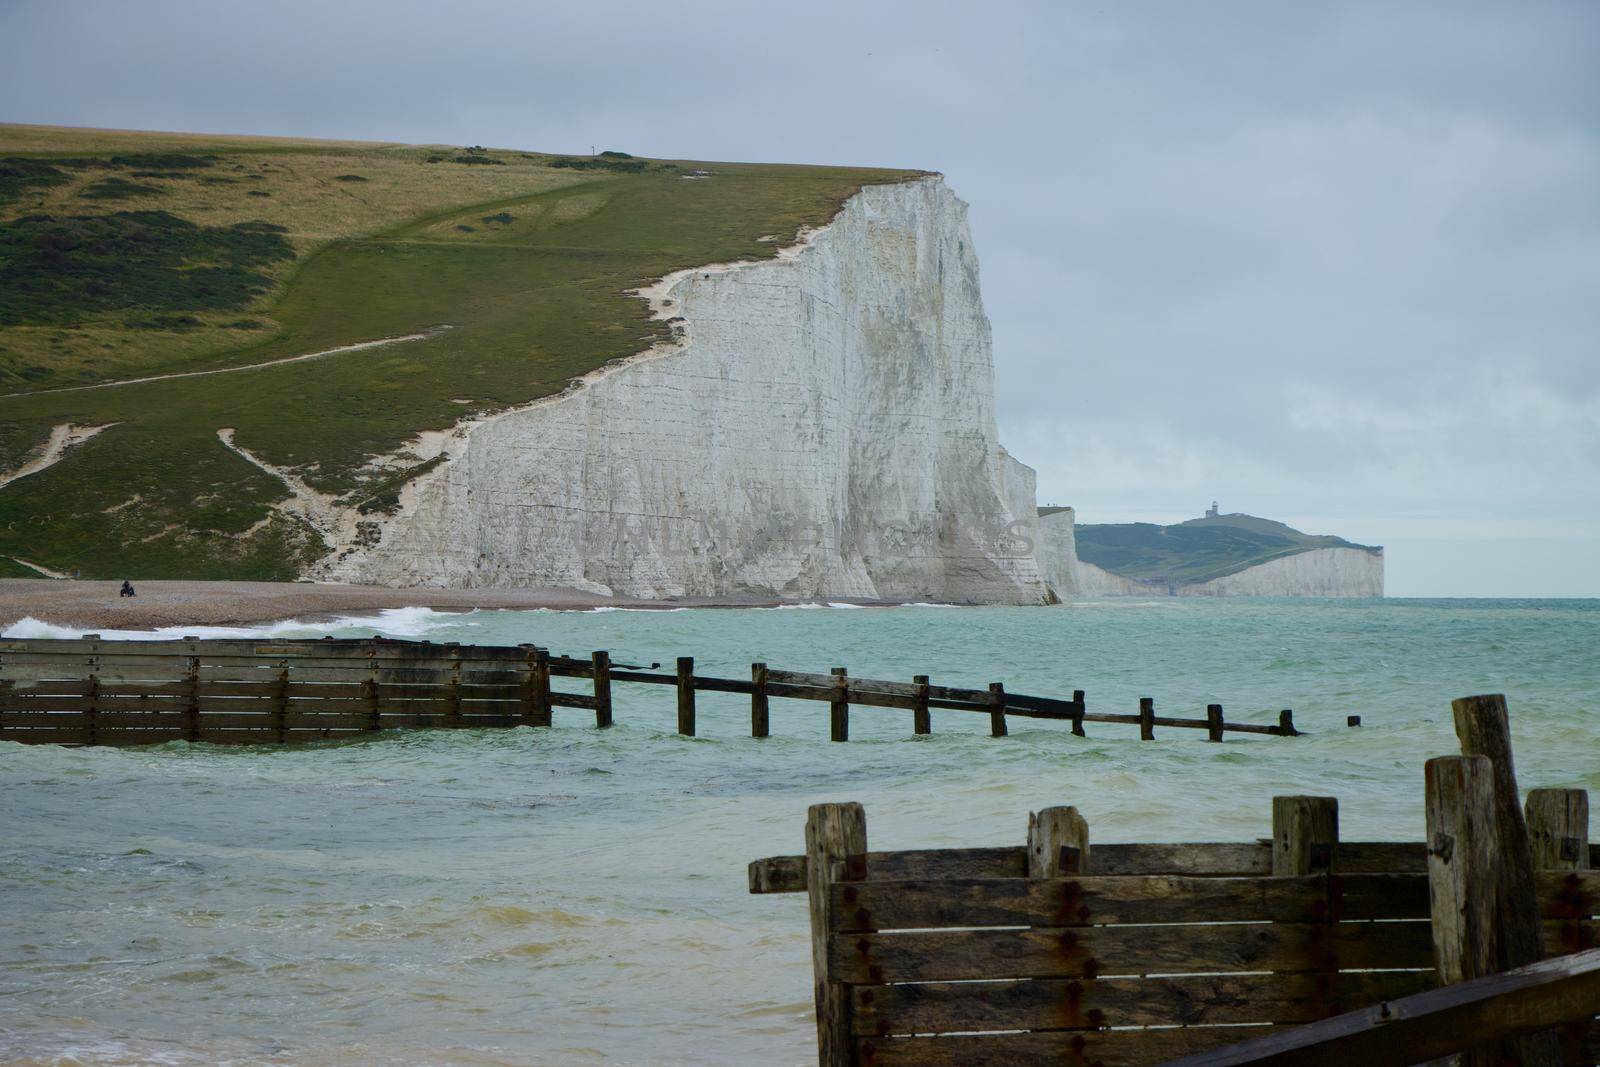 Dramatic view of the Seven Sisters coastline, sea and clouds with structures made of planks of wood. Taken in summer, England, UK on Canon EOS 90D.